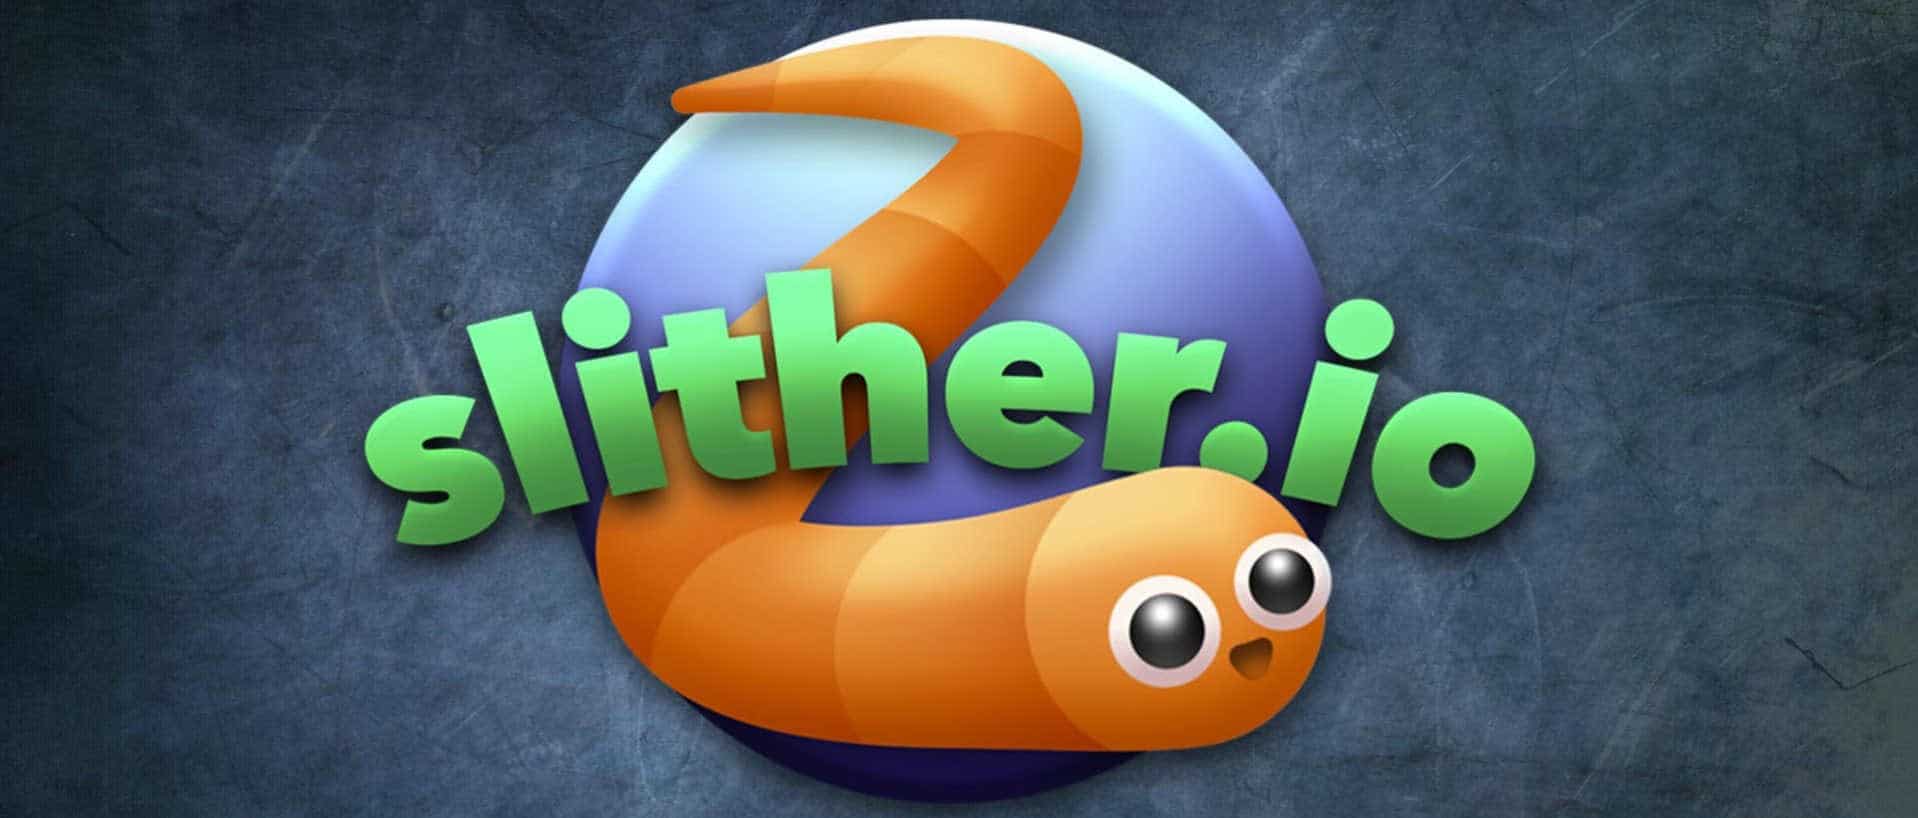 18 Best Games Like Slither.io You Must Try in 2020